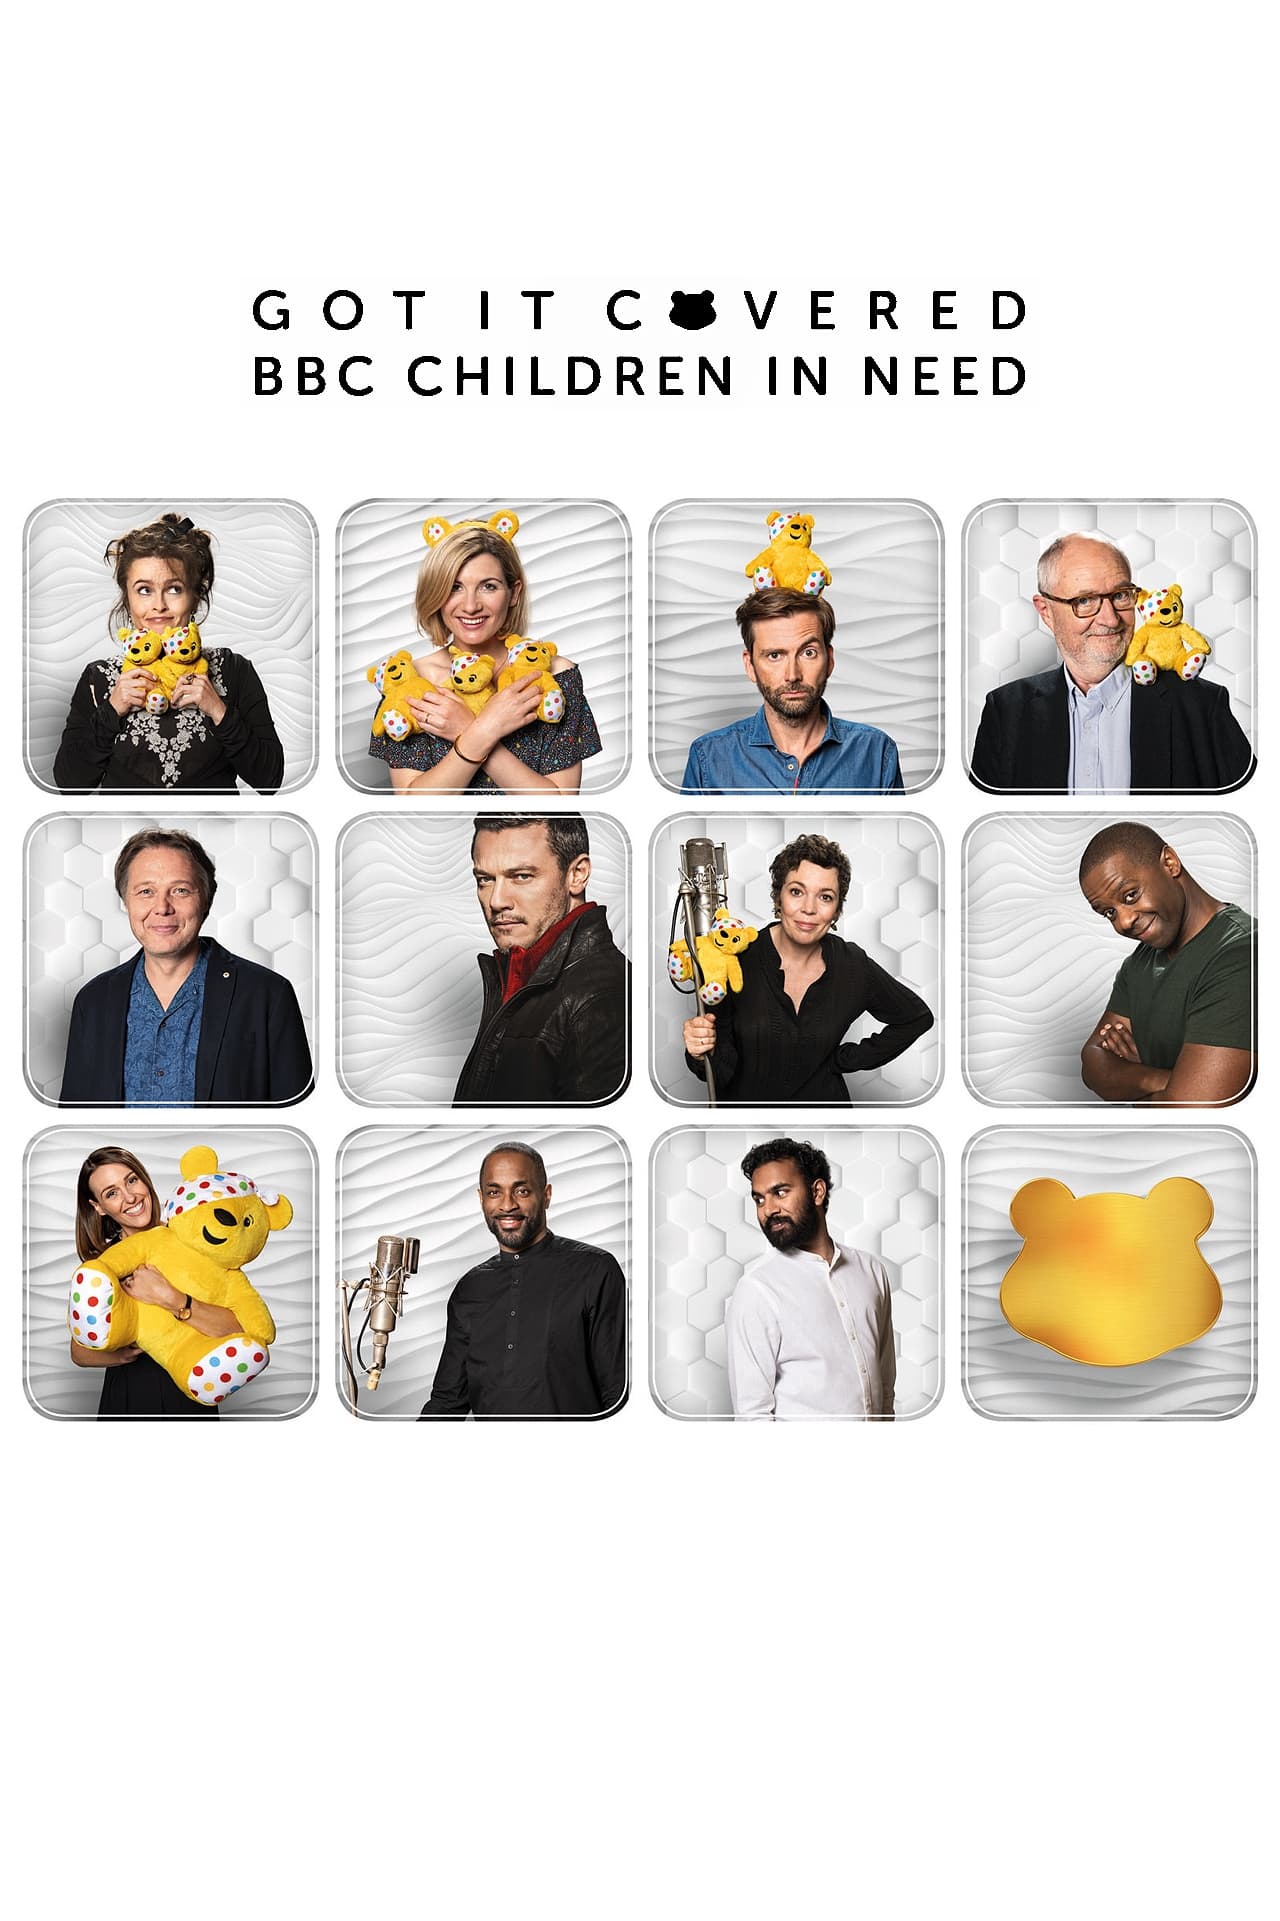 Children In Need 2019: Got It Covered (2019)